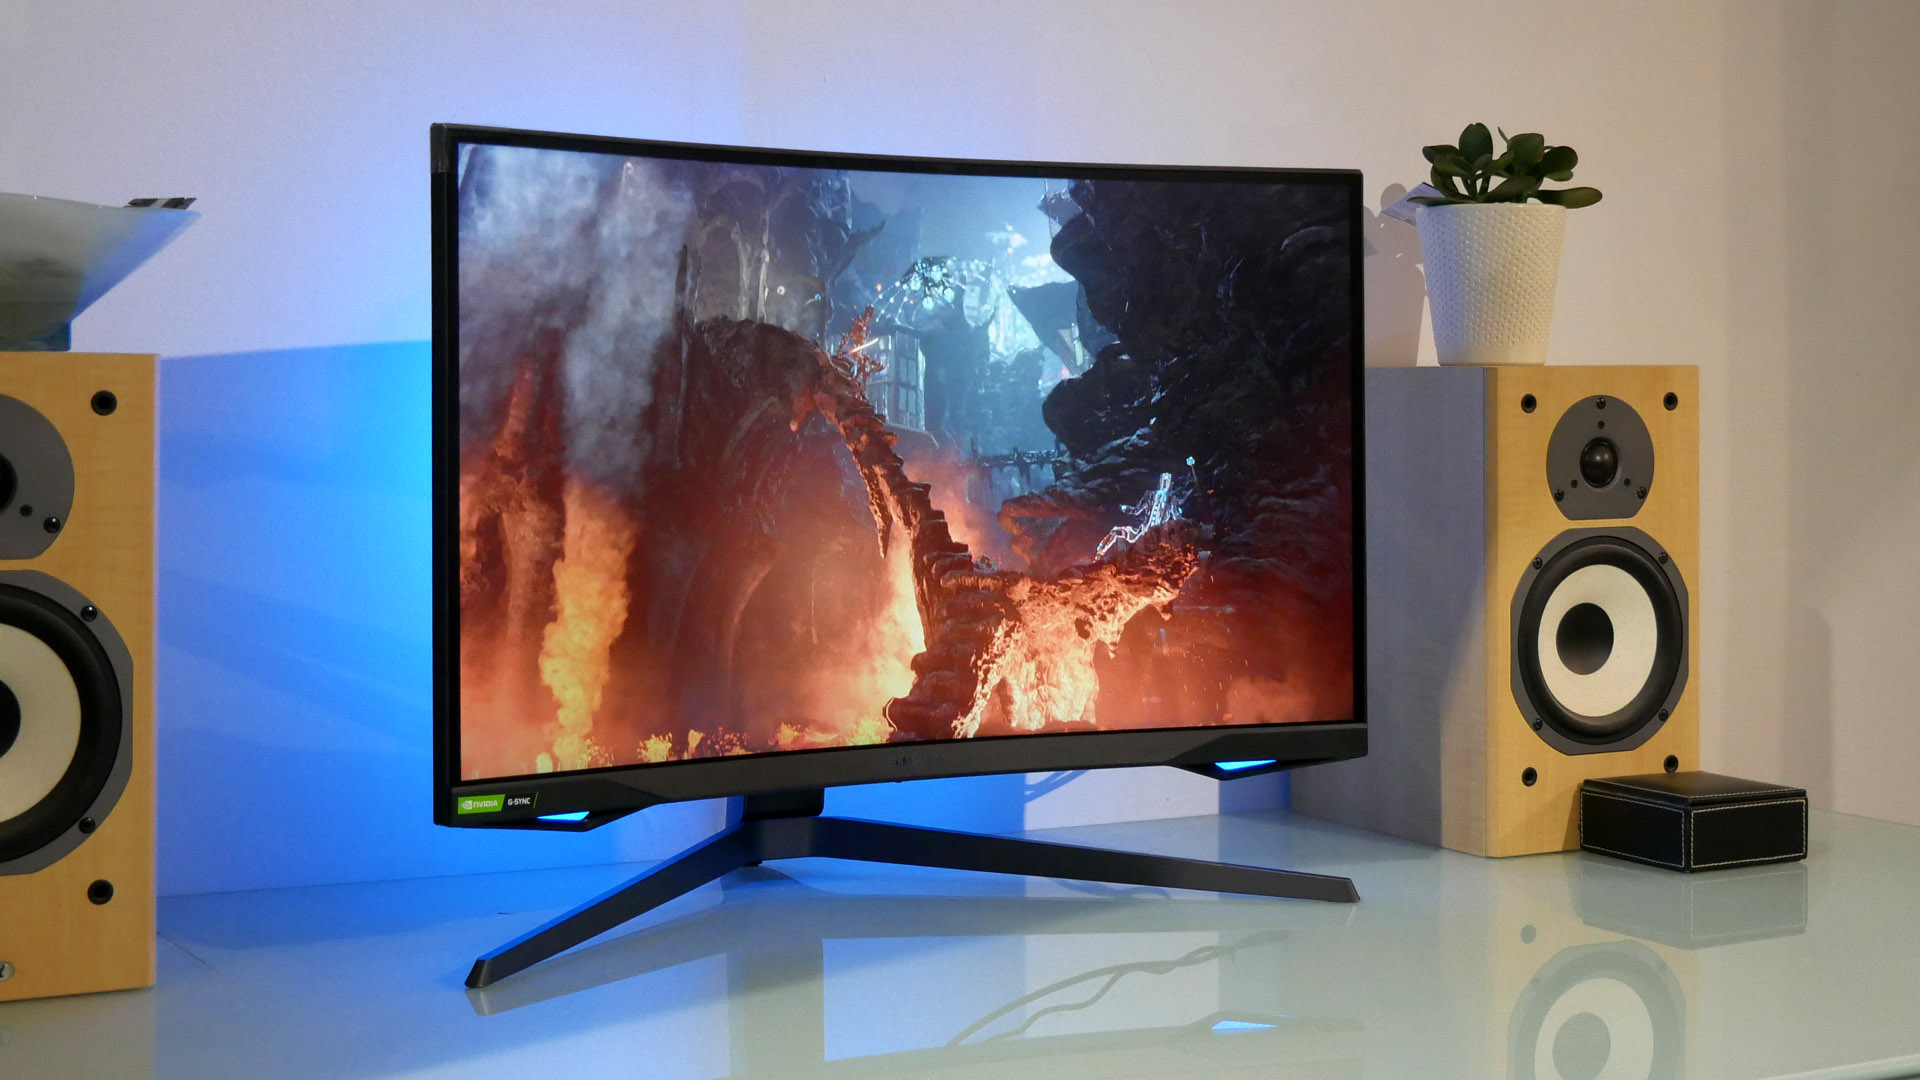 27 240hz Gaming Monitor LC27G75TQSUXEN